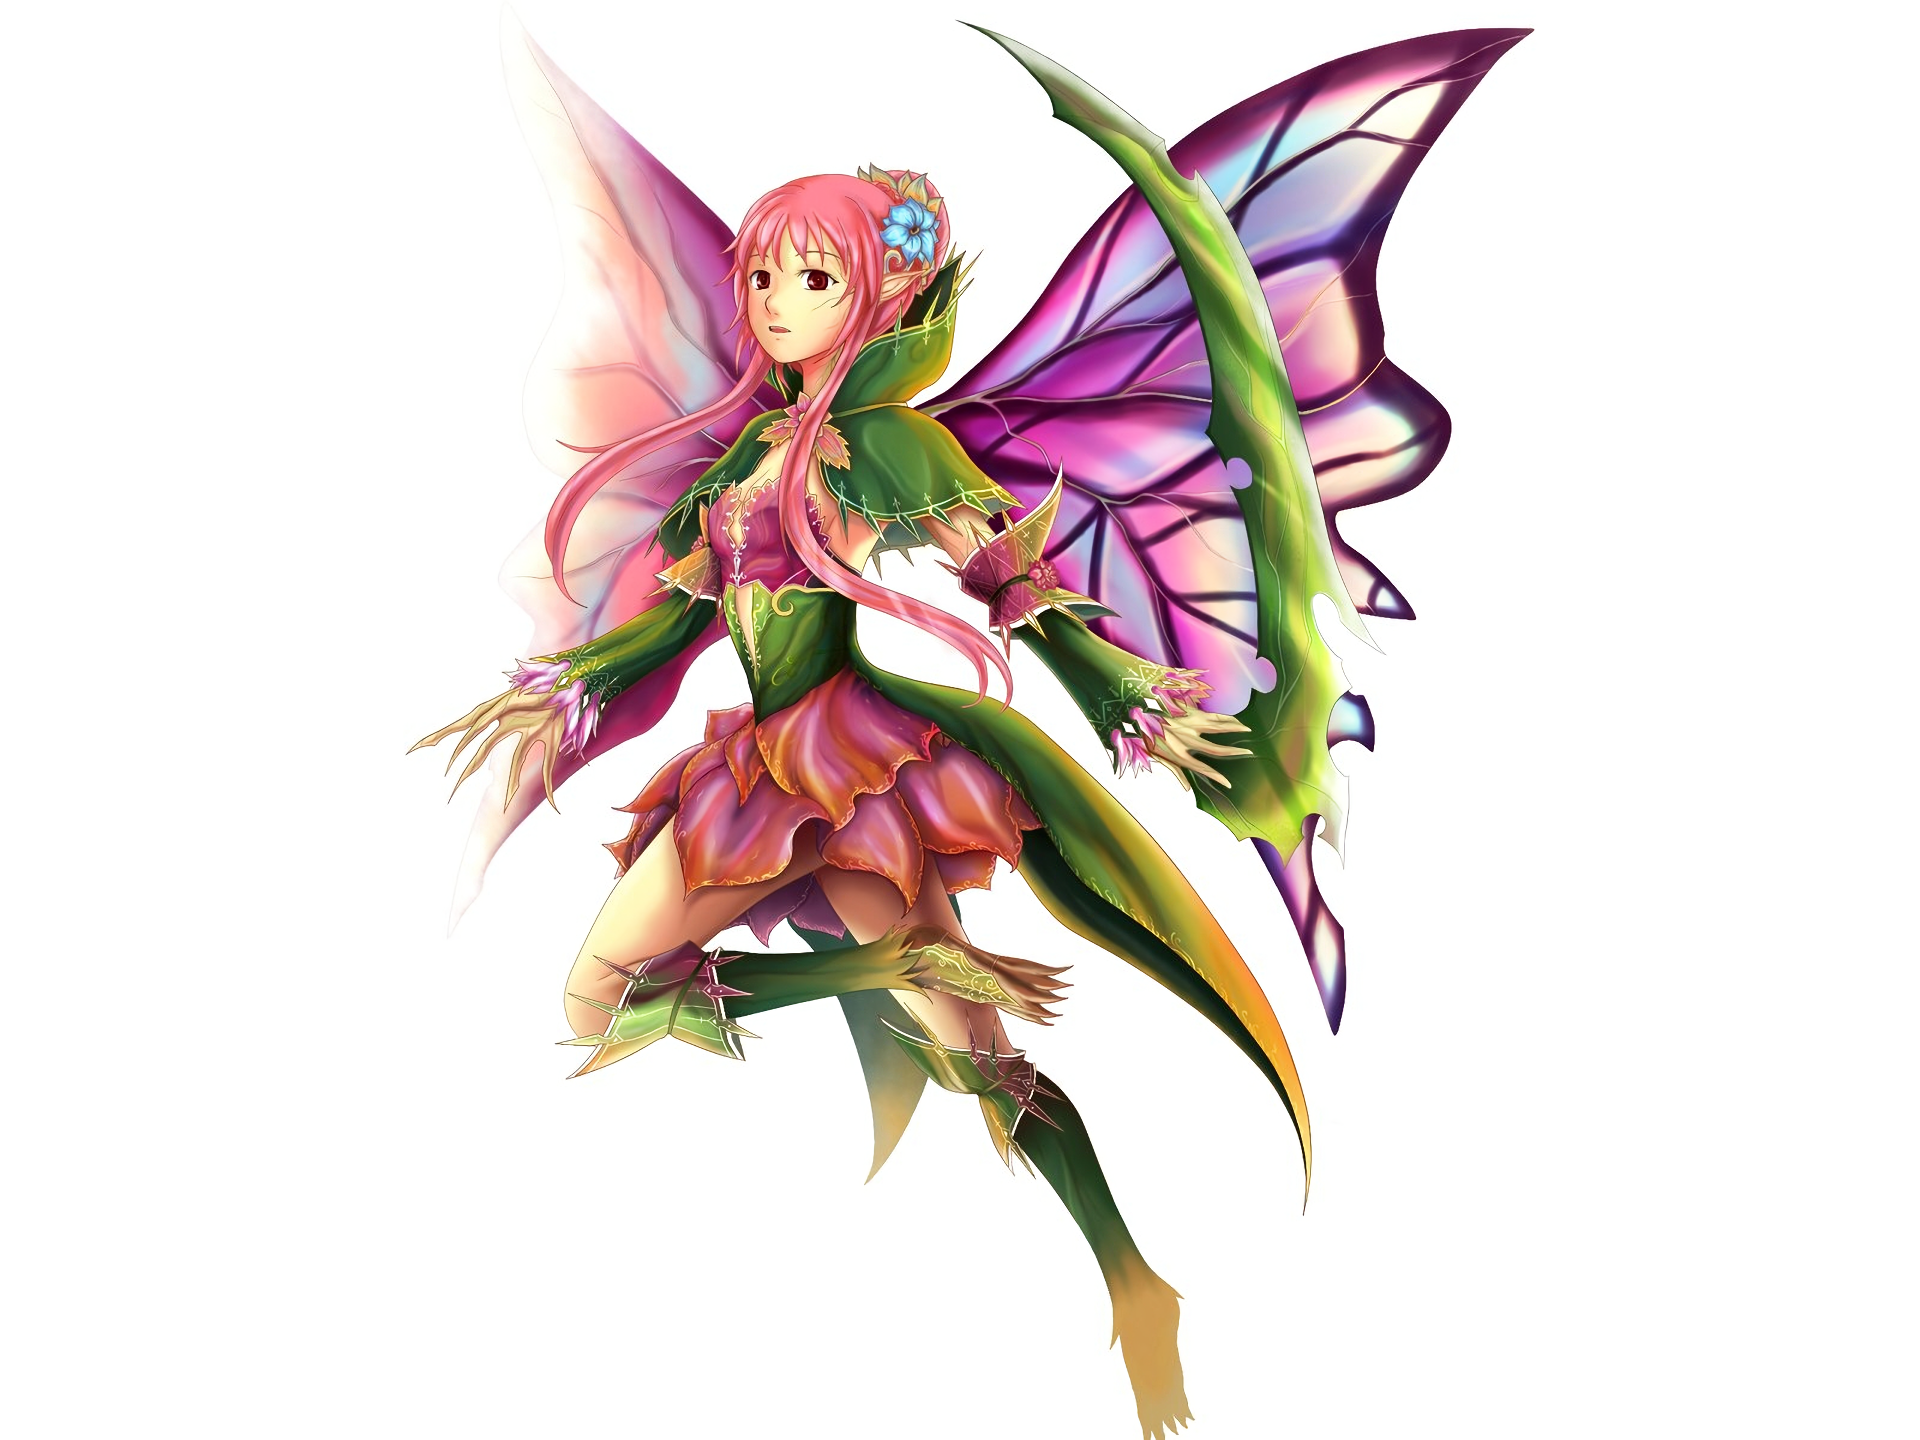 Colorful Fairy Fantasy Girl Pink Hair 1920x1440